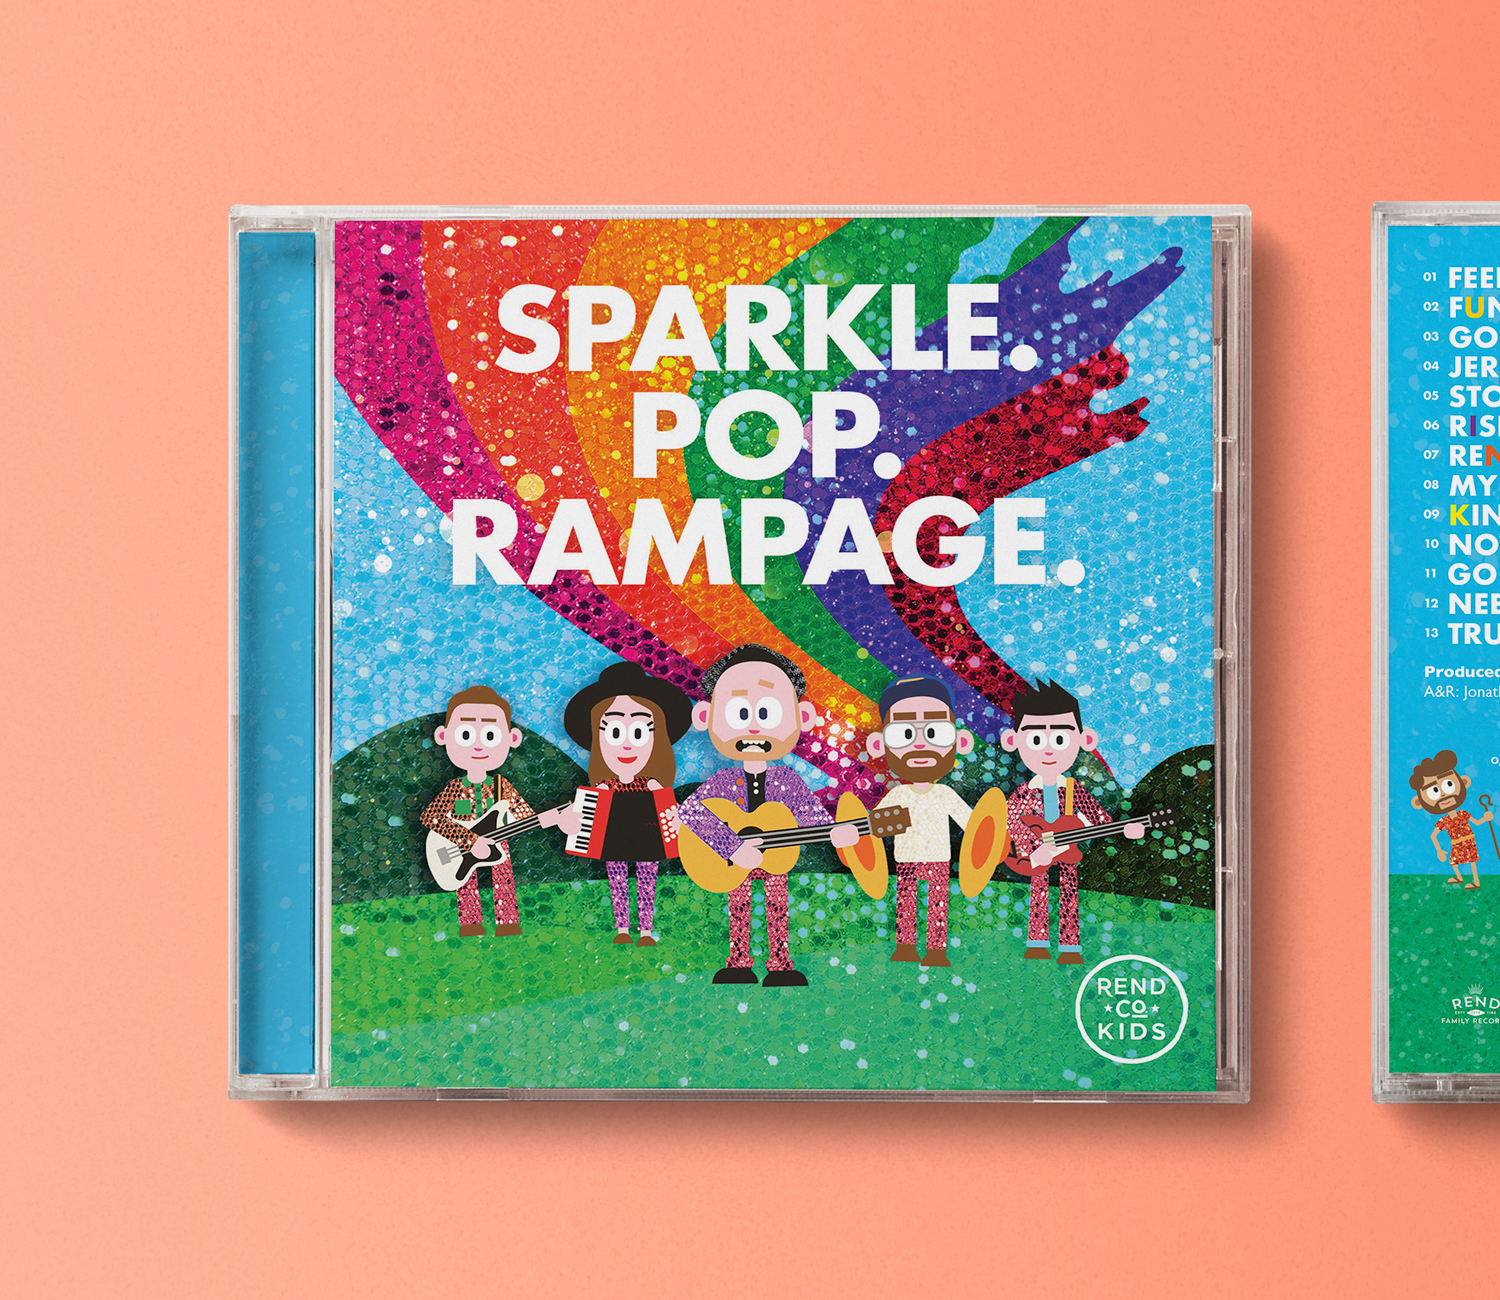 five illustrated band members holding instruments and standing under a sparkly rainbow